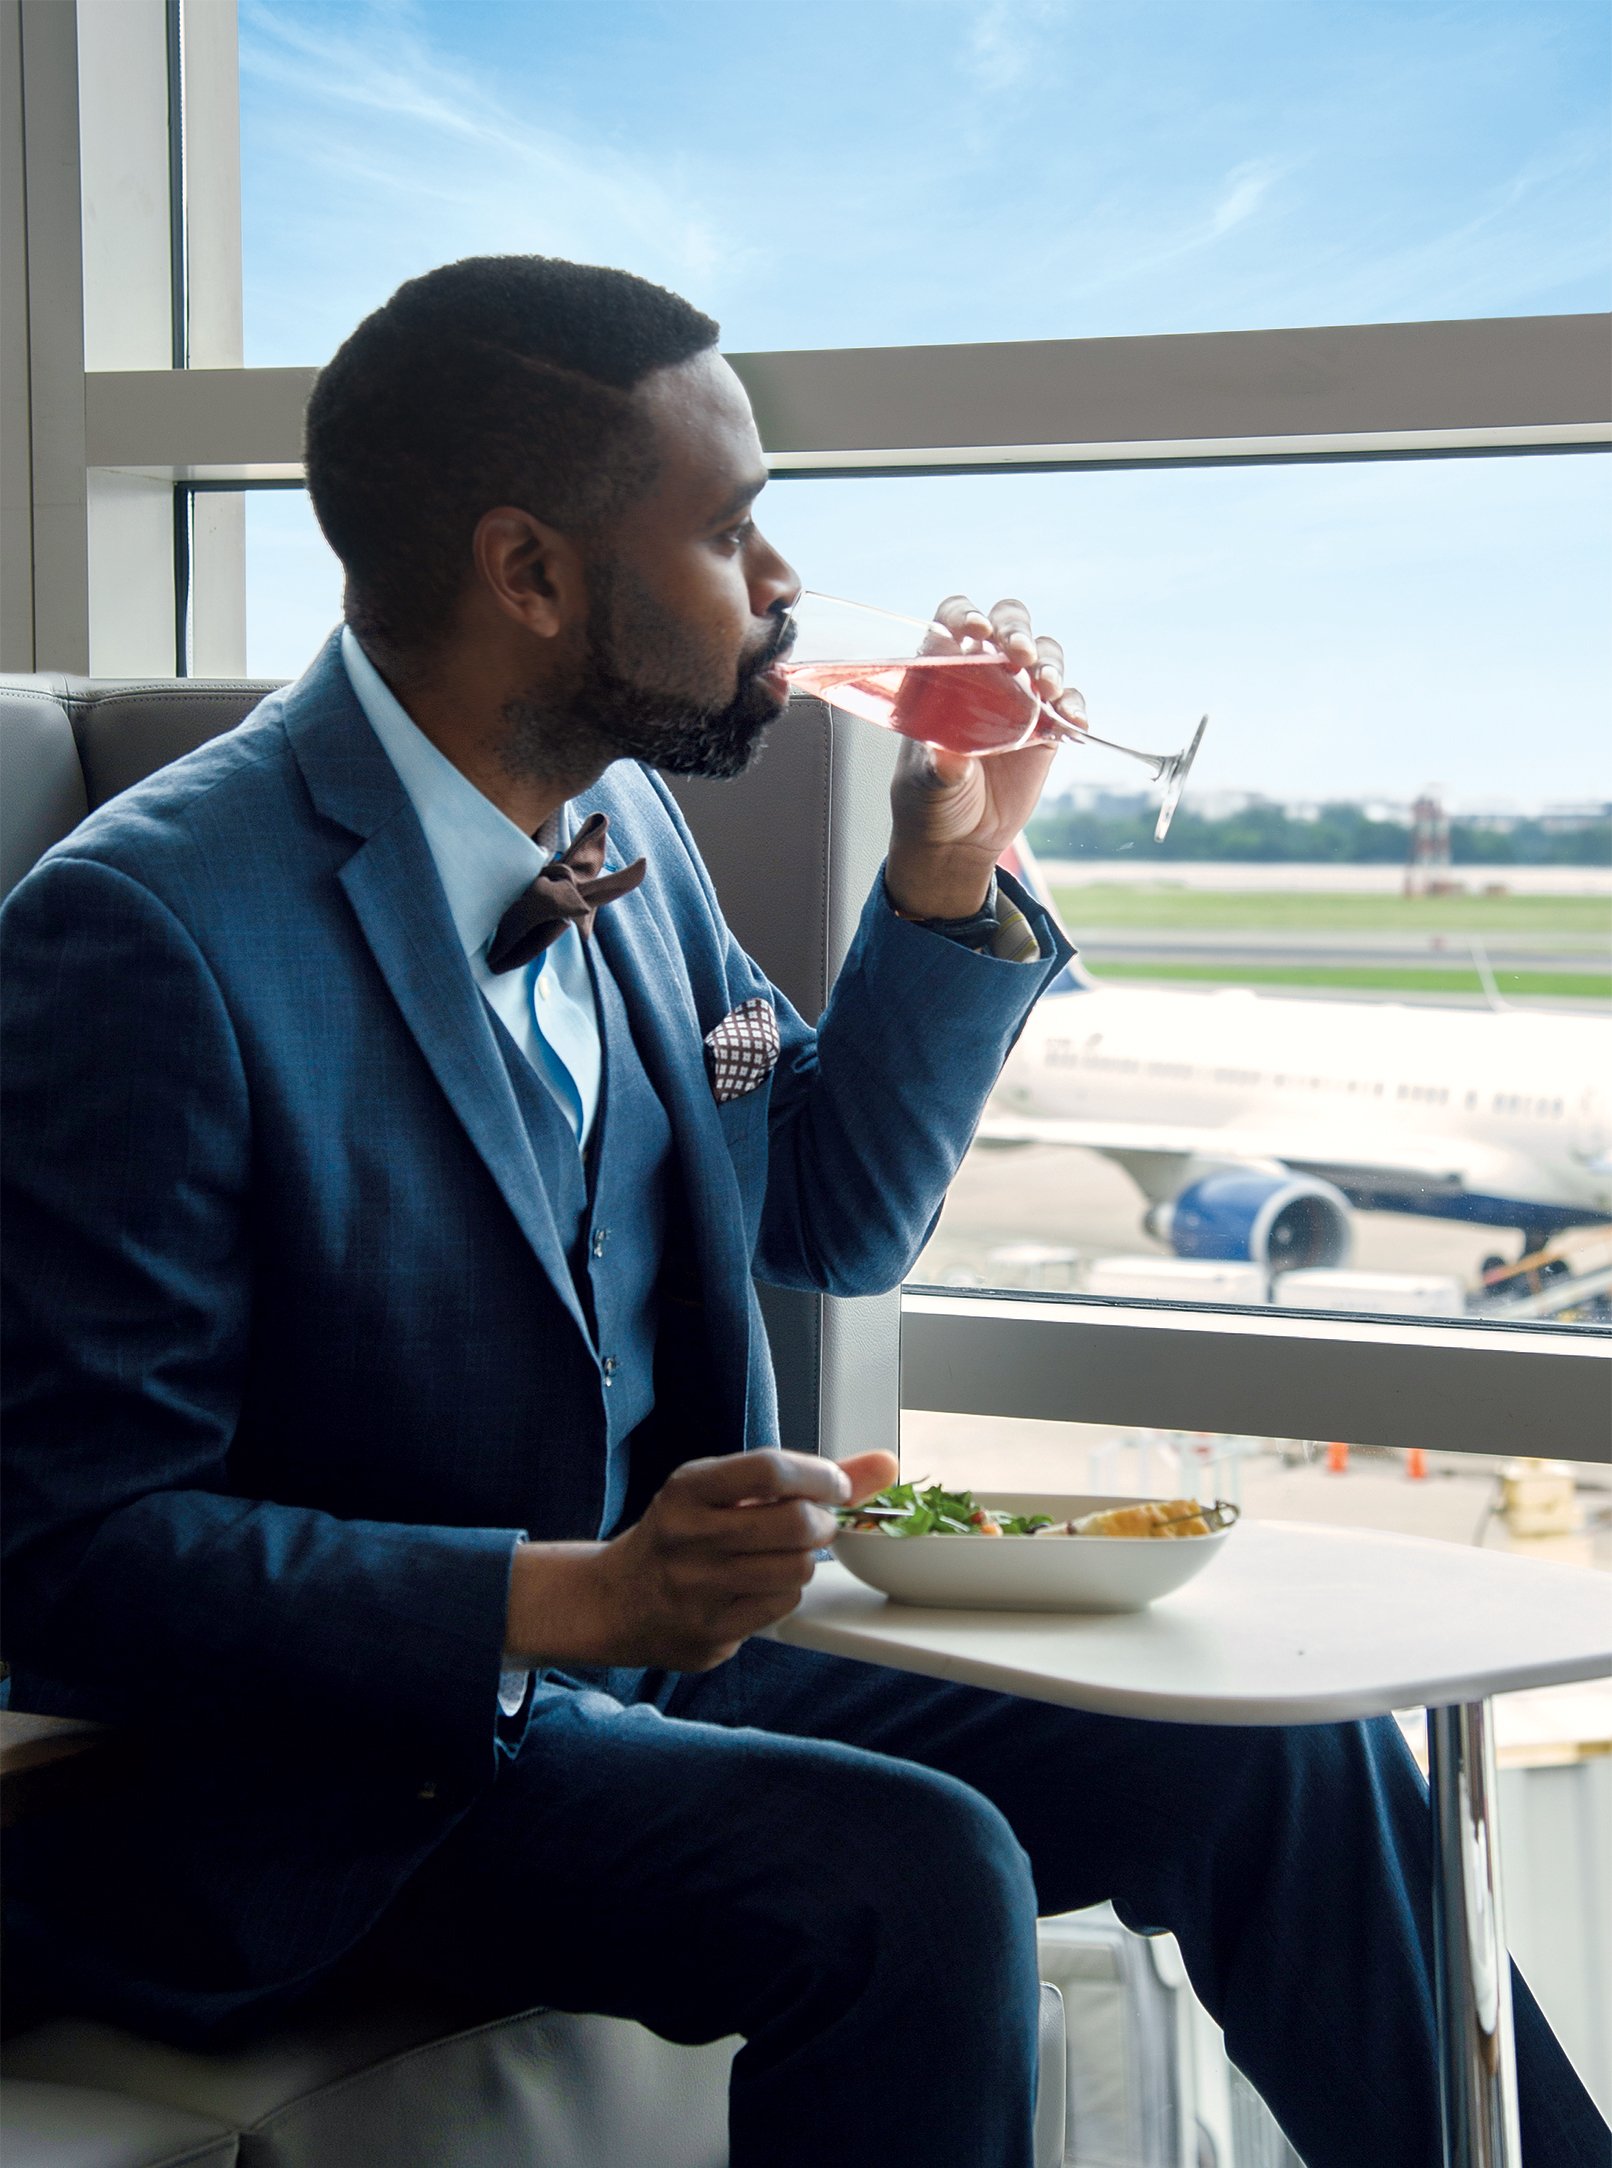 Airport lounges are getting luxe—Delta’s new lounge at DCA, seen here, serves up a menu by a top local chef. Photograph courtesy of Delta.